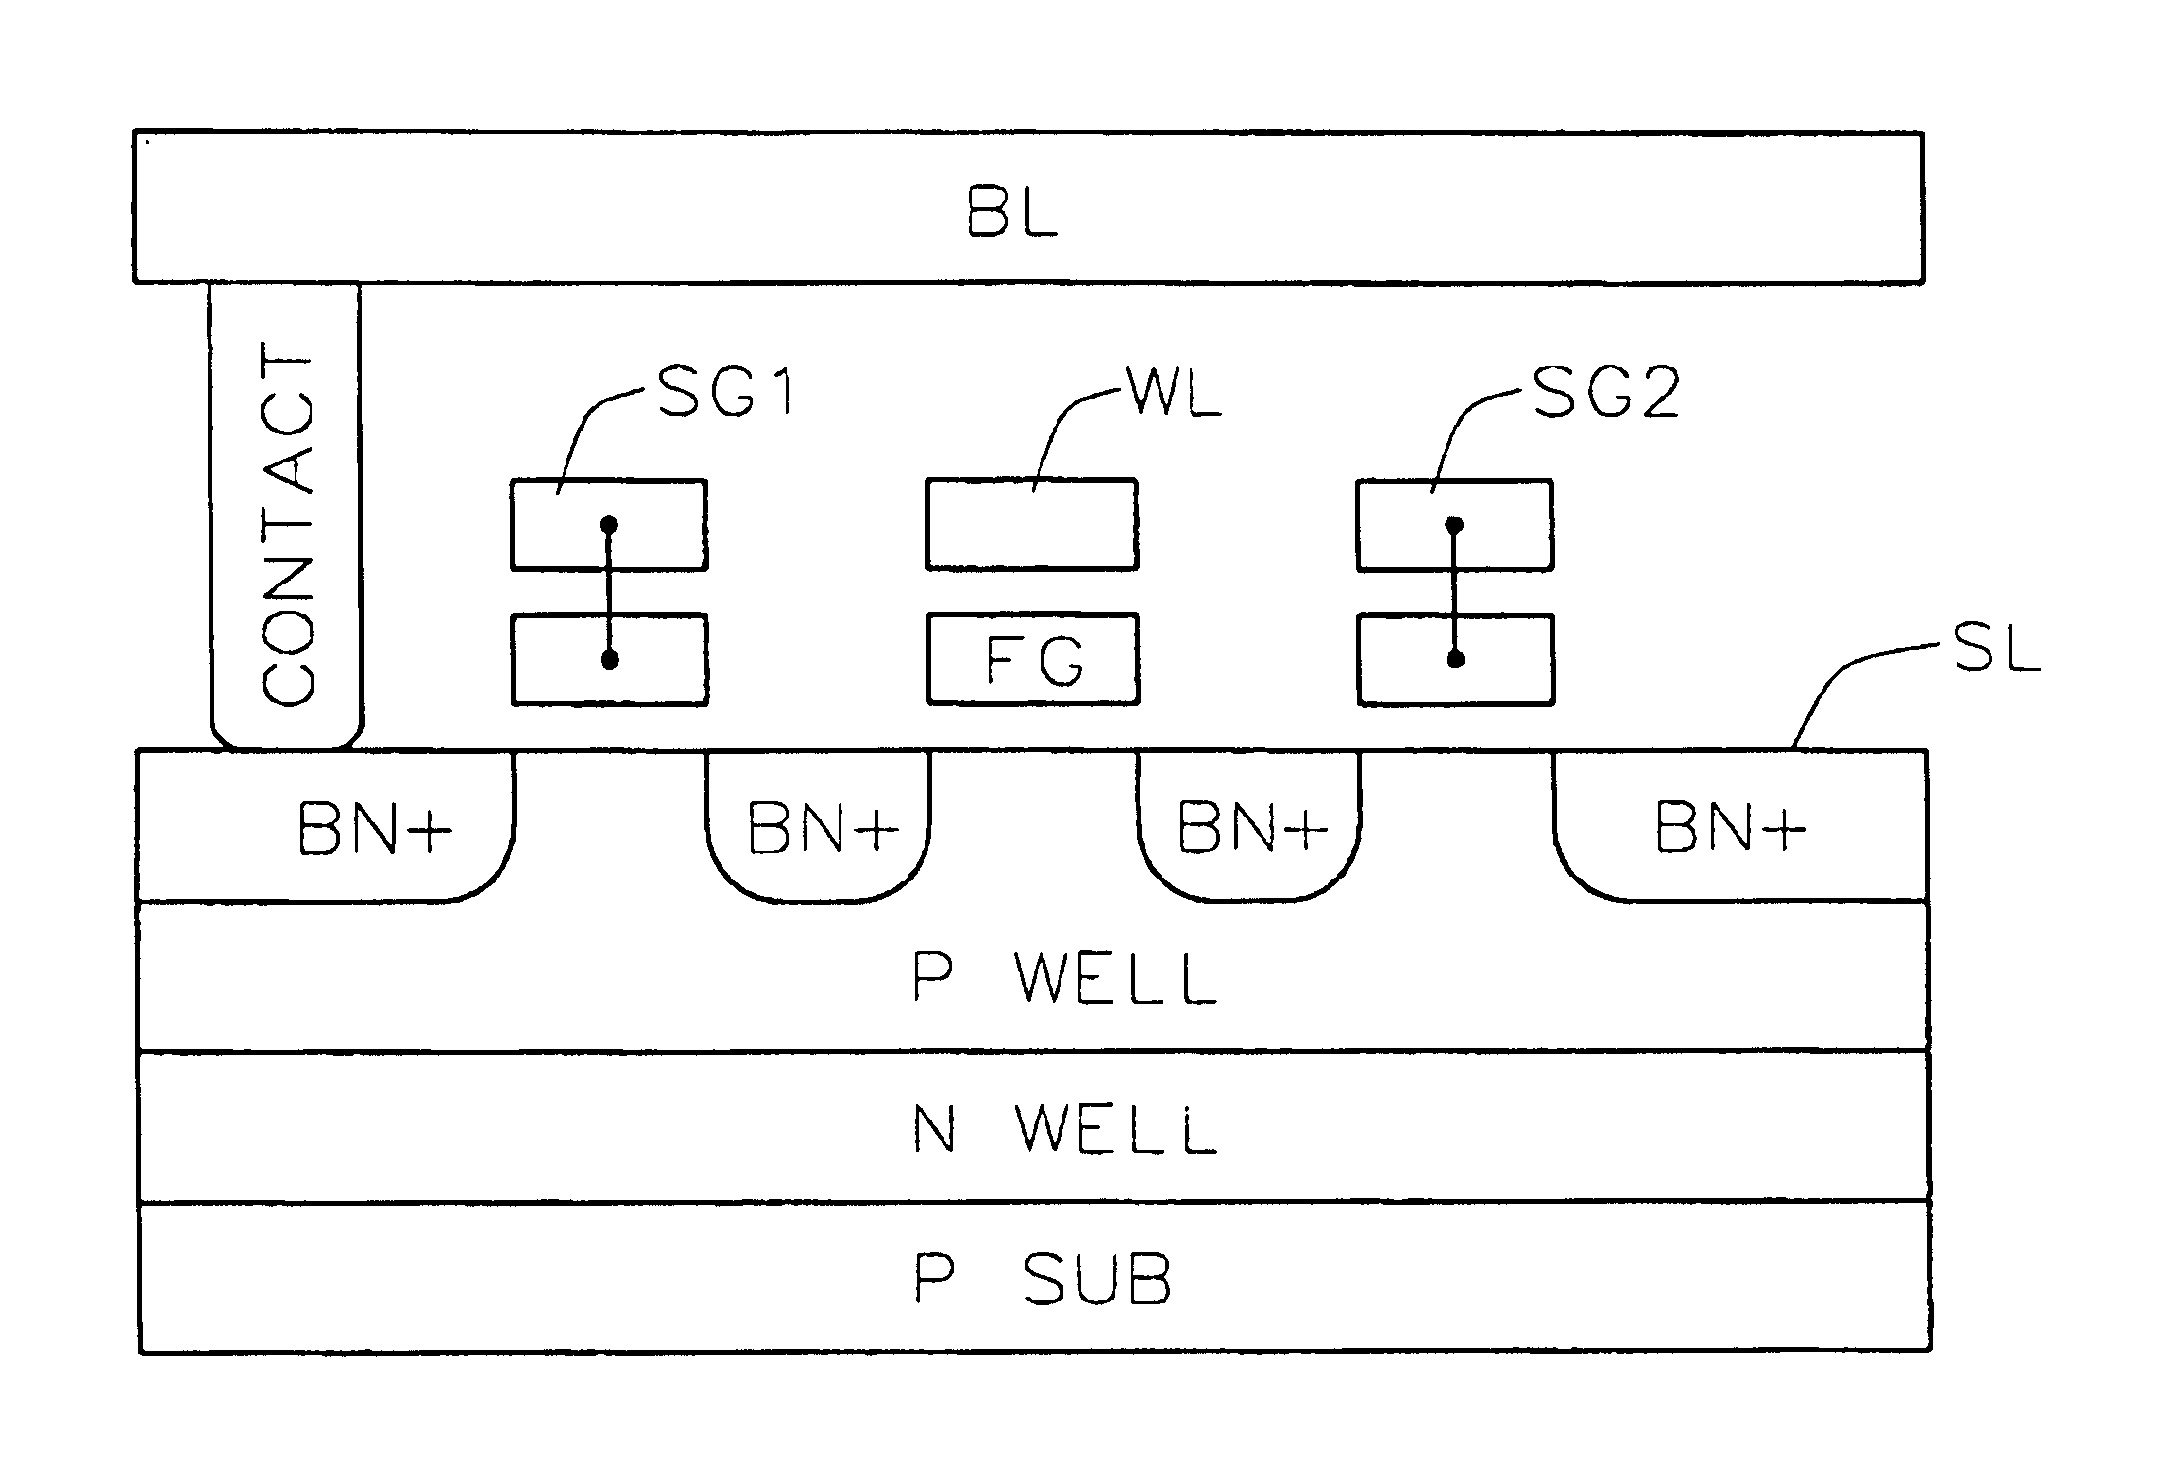 Monolithic, combo nonvolatile memory allowing byte, page and block write with no disturb and divided-well in the cell array using a unified cell structure and technology with a new scheme of decoder and layout